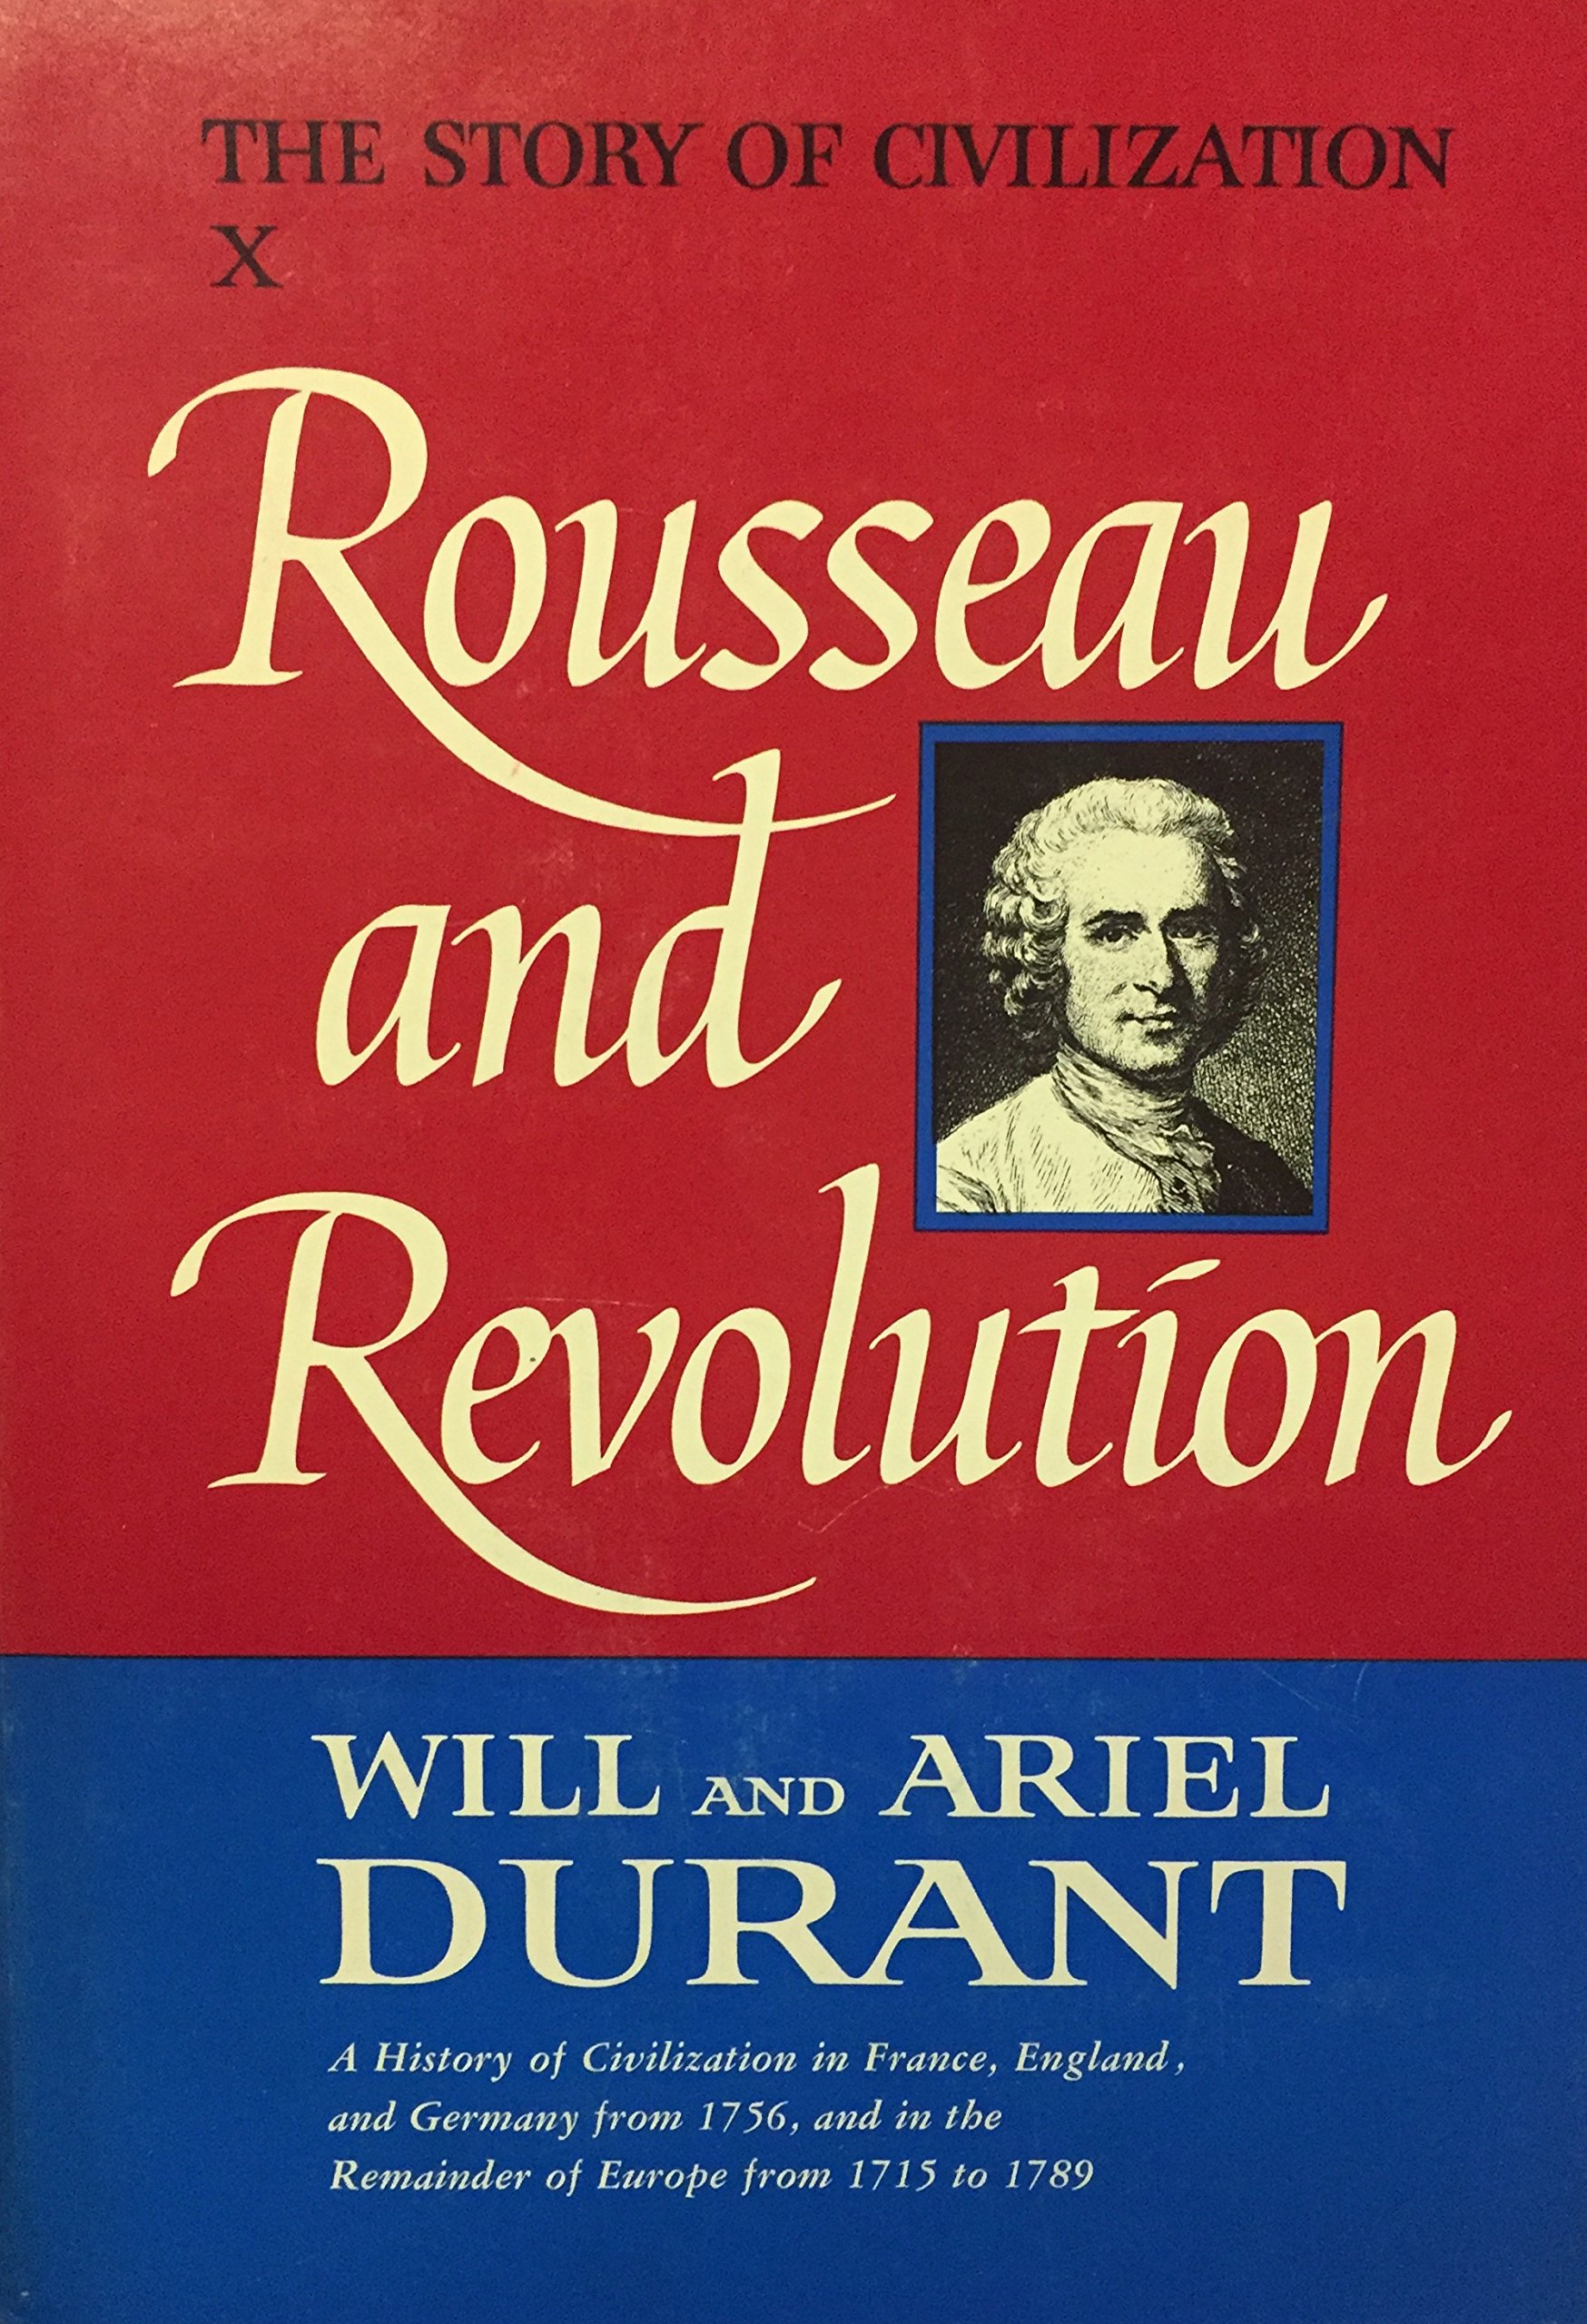 Ariel Durant, Will Durant: Rousseau and Revolution (Hardcover, 1967, Simon & Schuster)